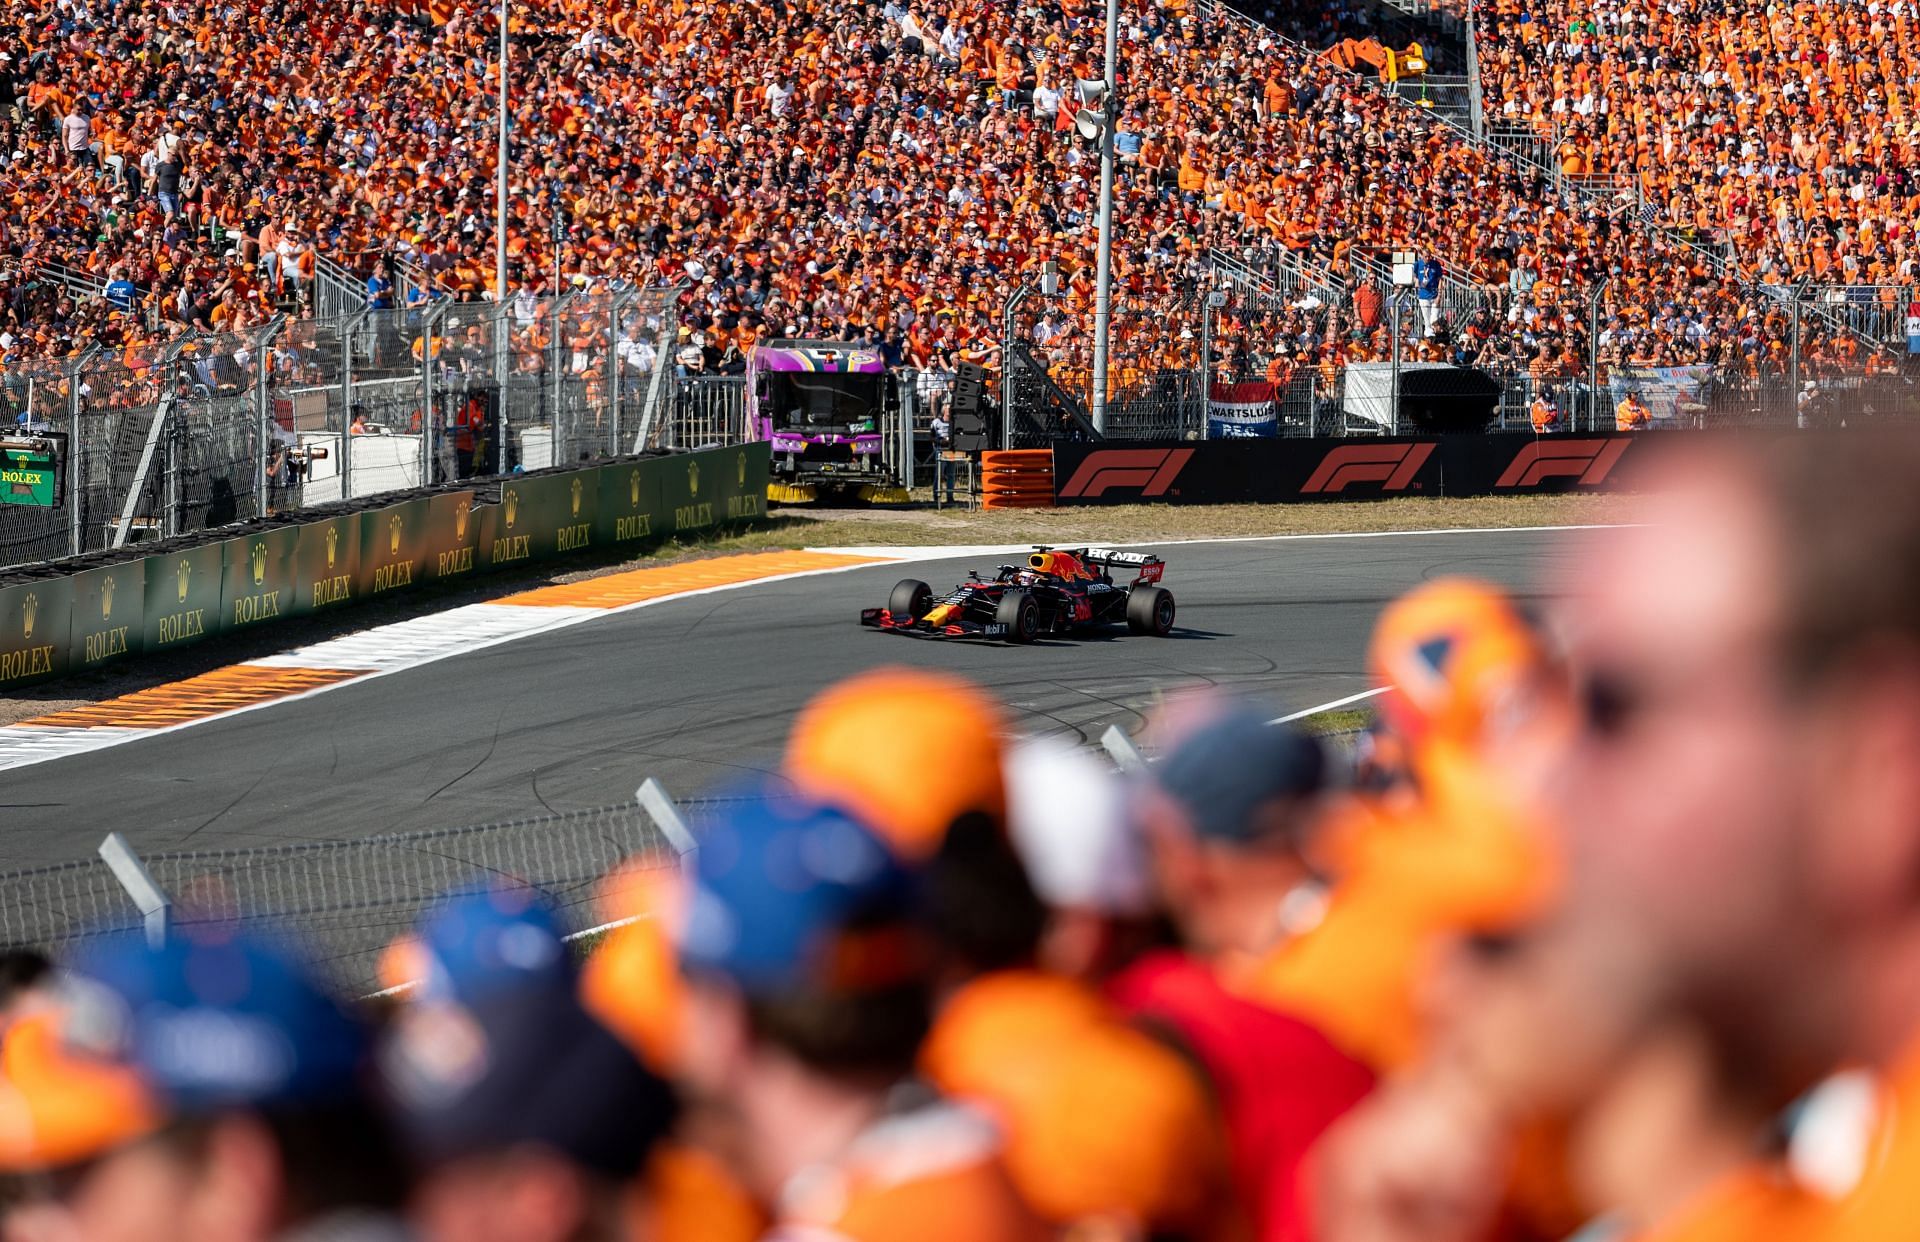 Action from the Dutch F1 Grand Prix 2021